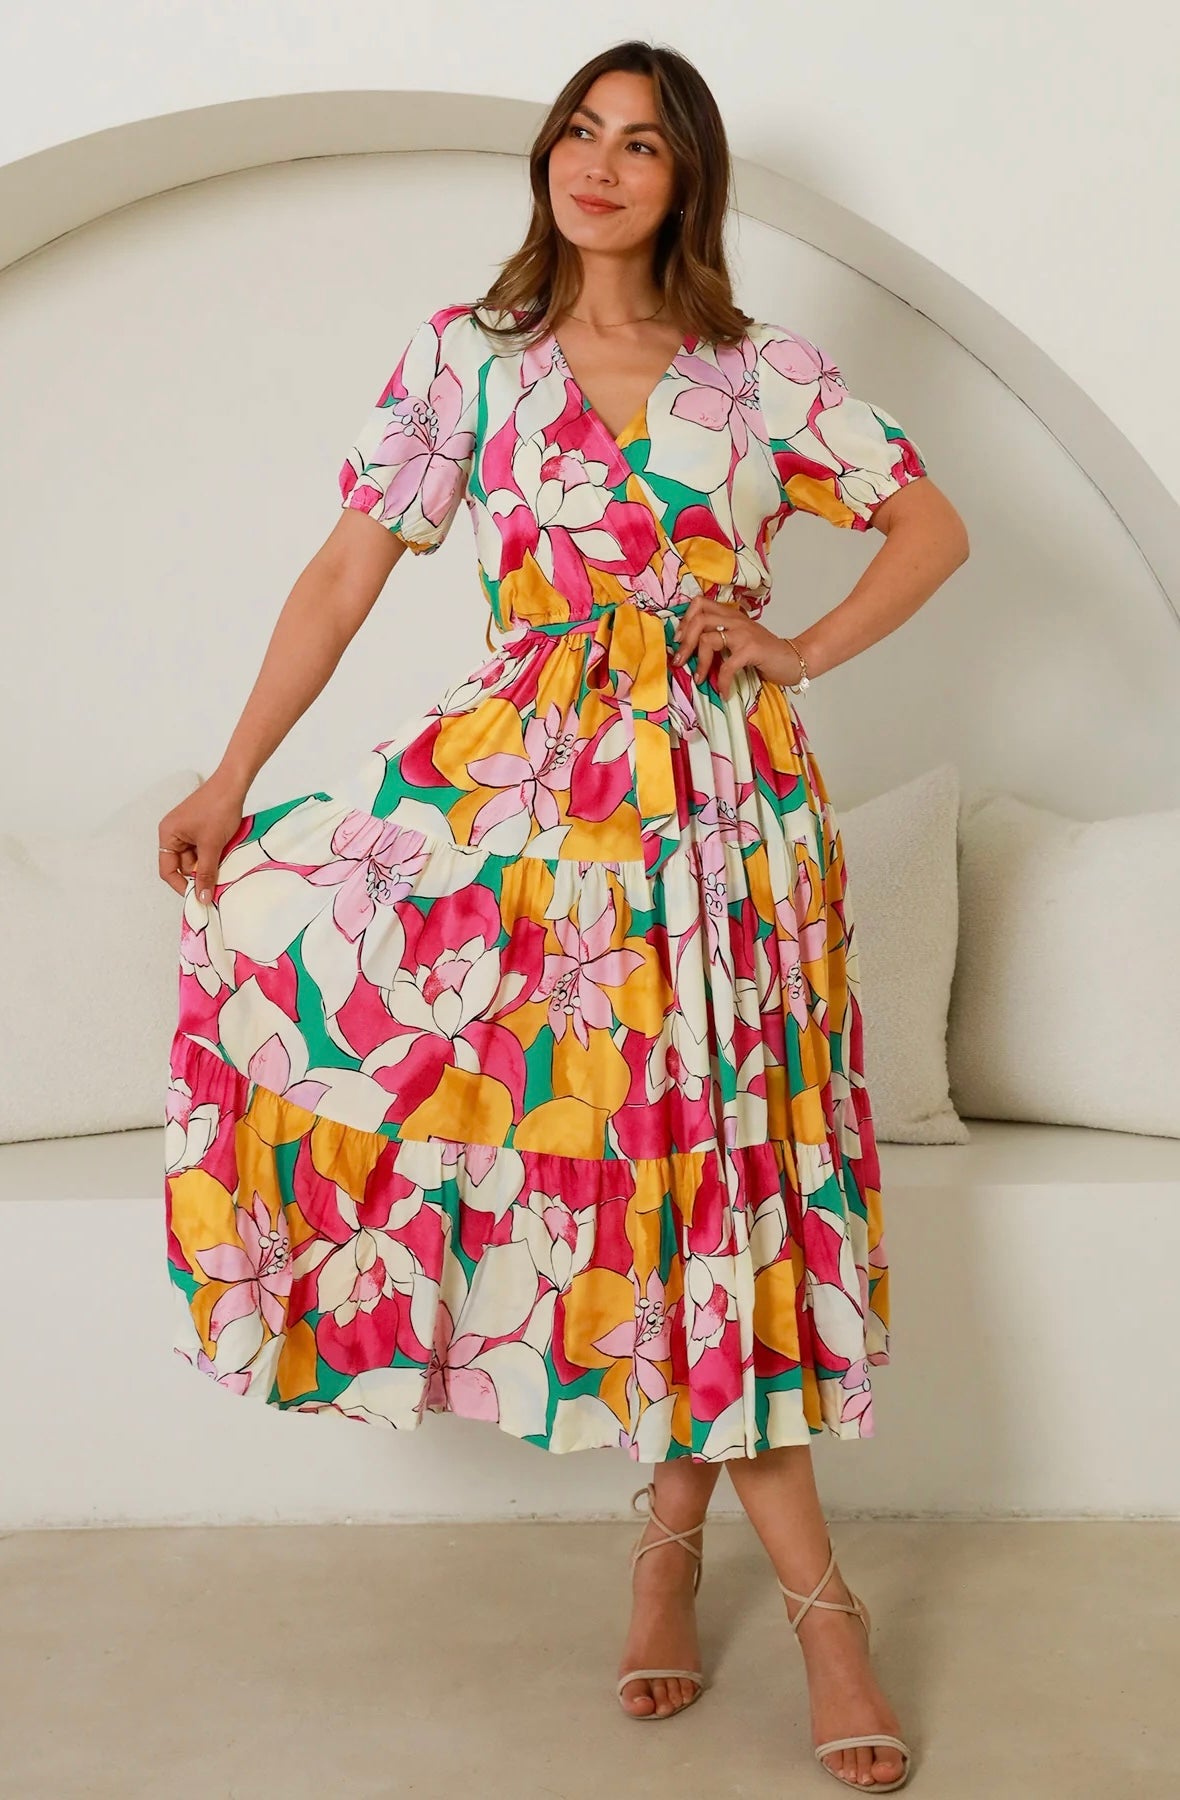 ***NEW*** Tallulah Midi Dress: Tallulah brings vibrant pinks, yellows and greens together in a vibrant floral print and super cute shape. It has a tiered midi skirt, crossover bust and elasticated - Ciao Bella Dresses 